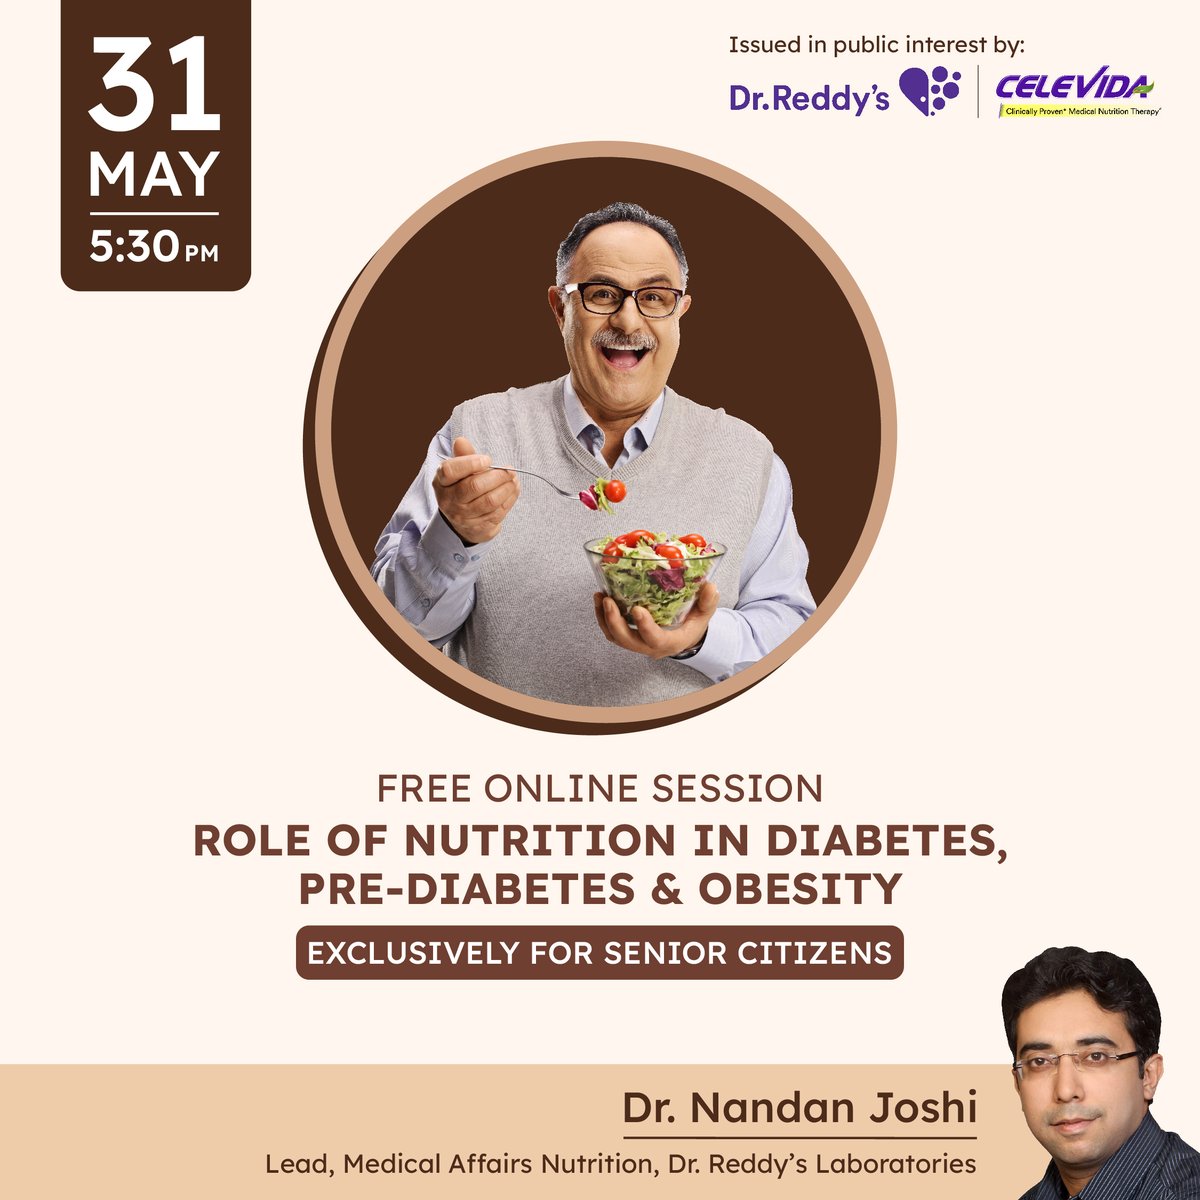 An informative session for senior citizens with Dr. Nandan Joshi on the role of nutrition in managing diabetes, pre-diabetes, and obesity. Issued in public interest by Dr. Reddy's.
#HealthyEating #SeniorCitizens 
To attend in our exclusive sessions:
📱 Download the app :…